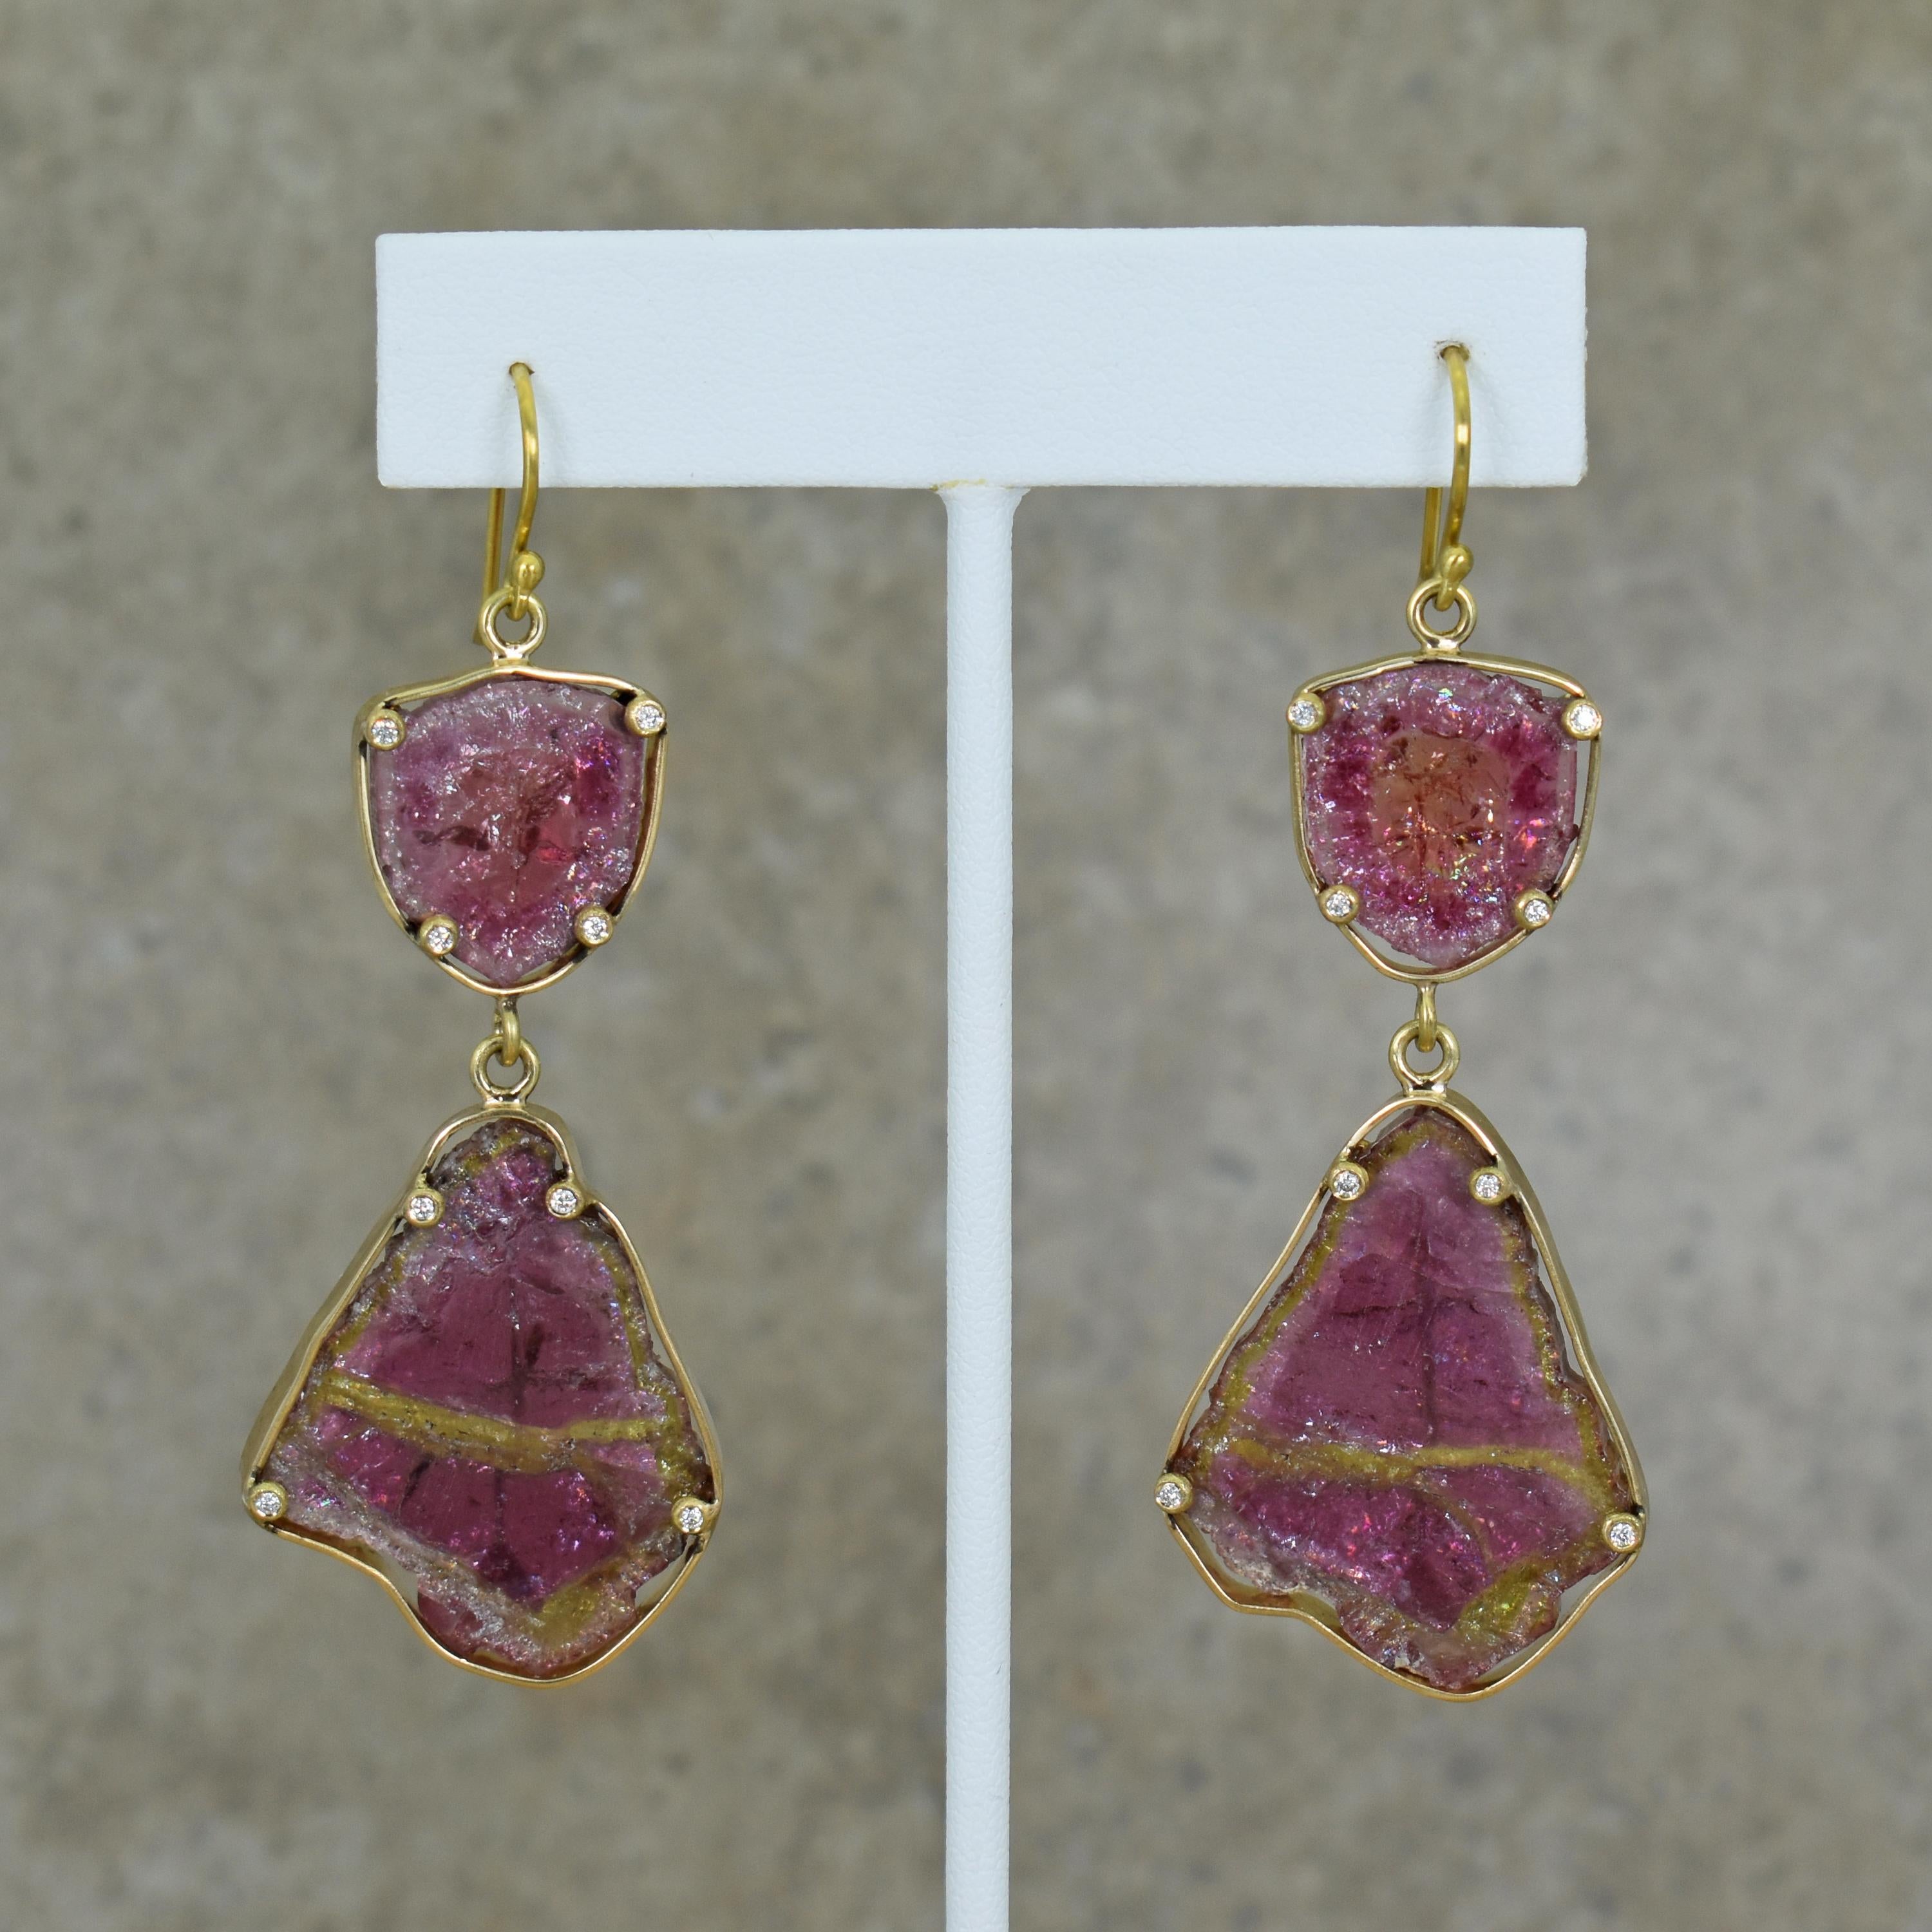 Russian pink watermelon Tourmaline slice, accent white Diamond prongs and 18k yellow gold dangle earrings. Dangle earrings are 2.88 inches in length. Gorgeous rough cut Tourmaline in these contemporary dangle earrings.